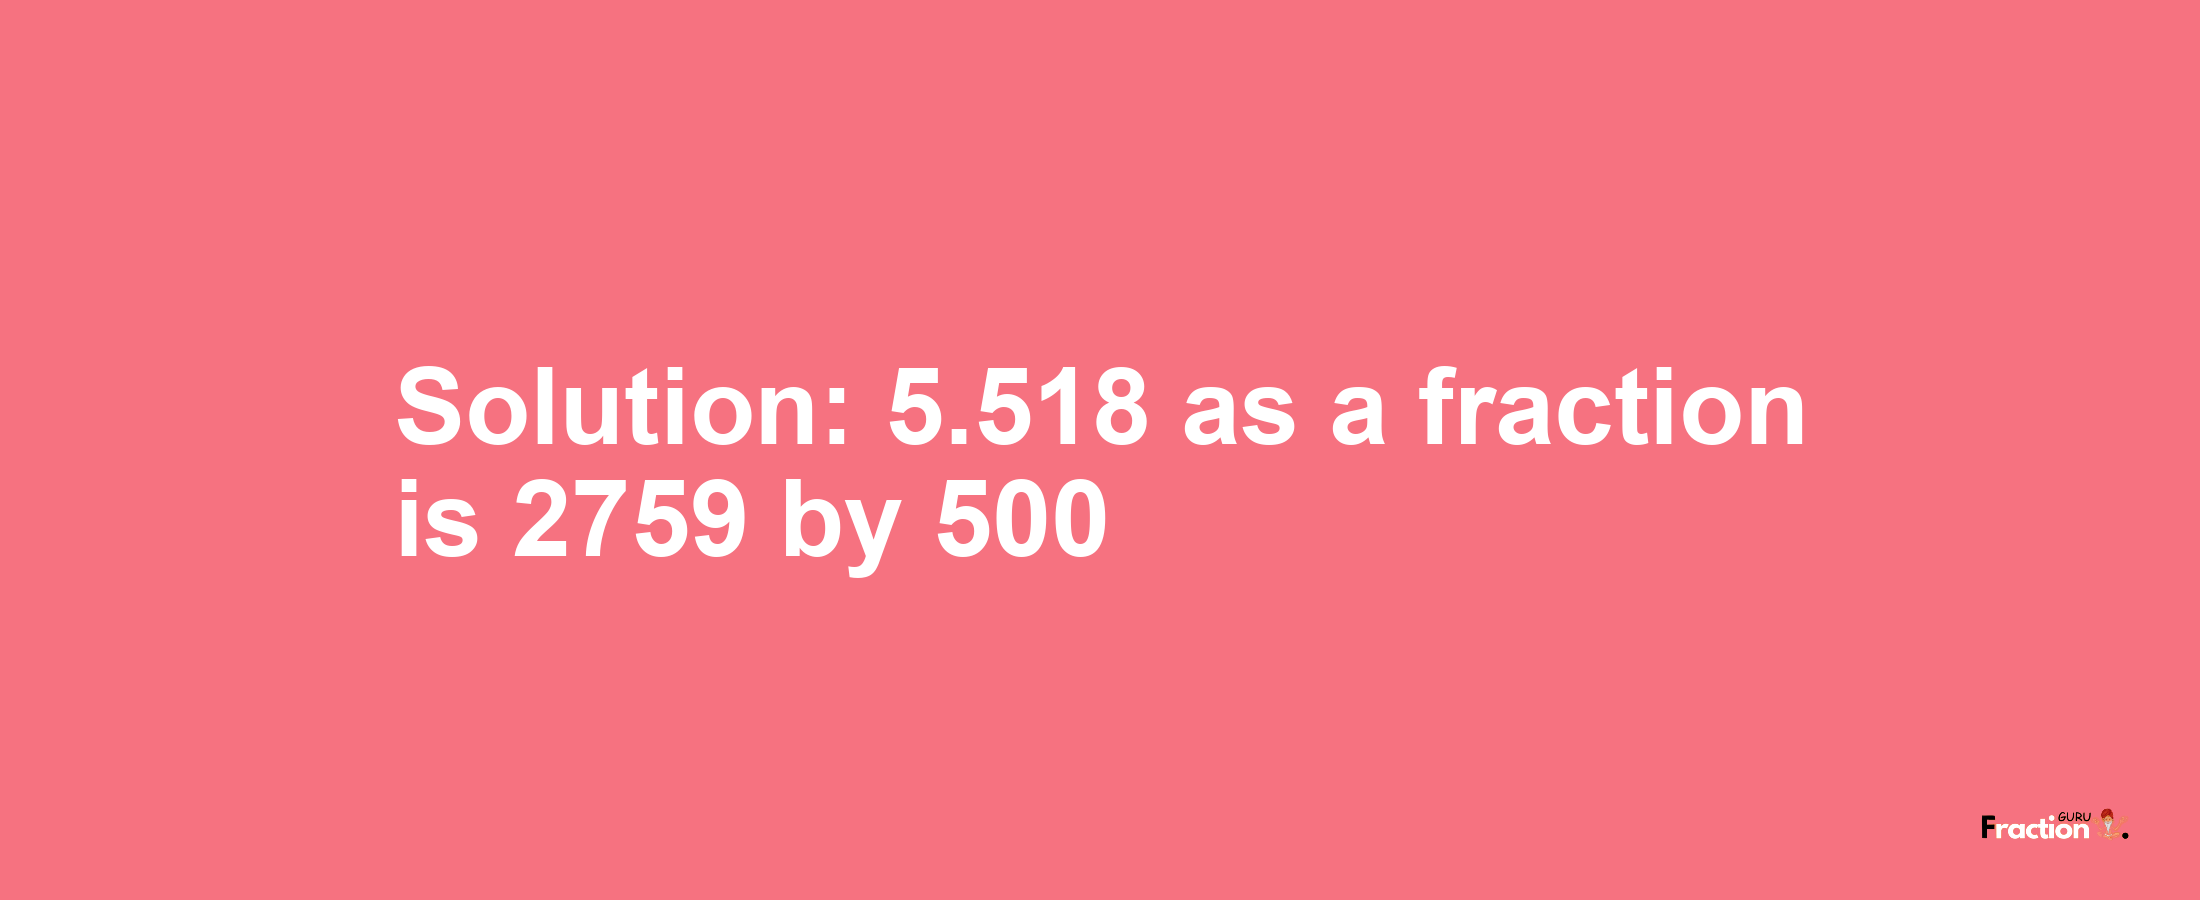 Solution:5.518 as a fraction is 2759/500